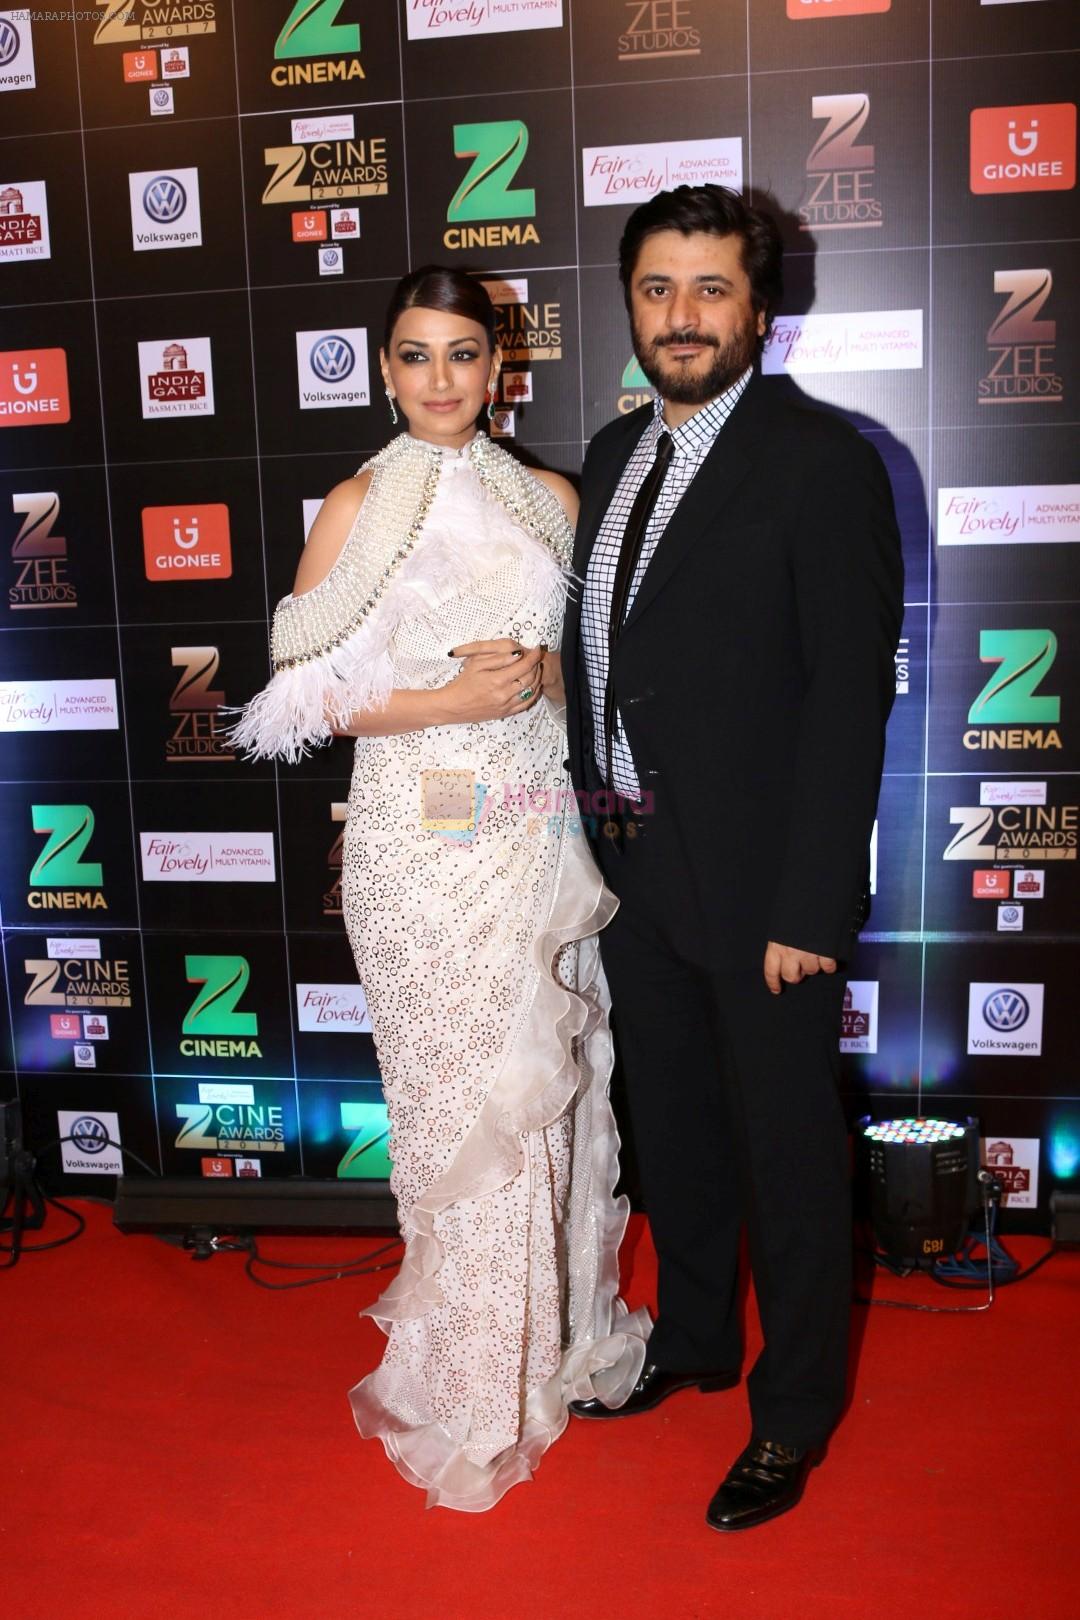 Sonali Bendre at Red Carpet Of Zee Cine Awards 2017 on 12th March 2017